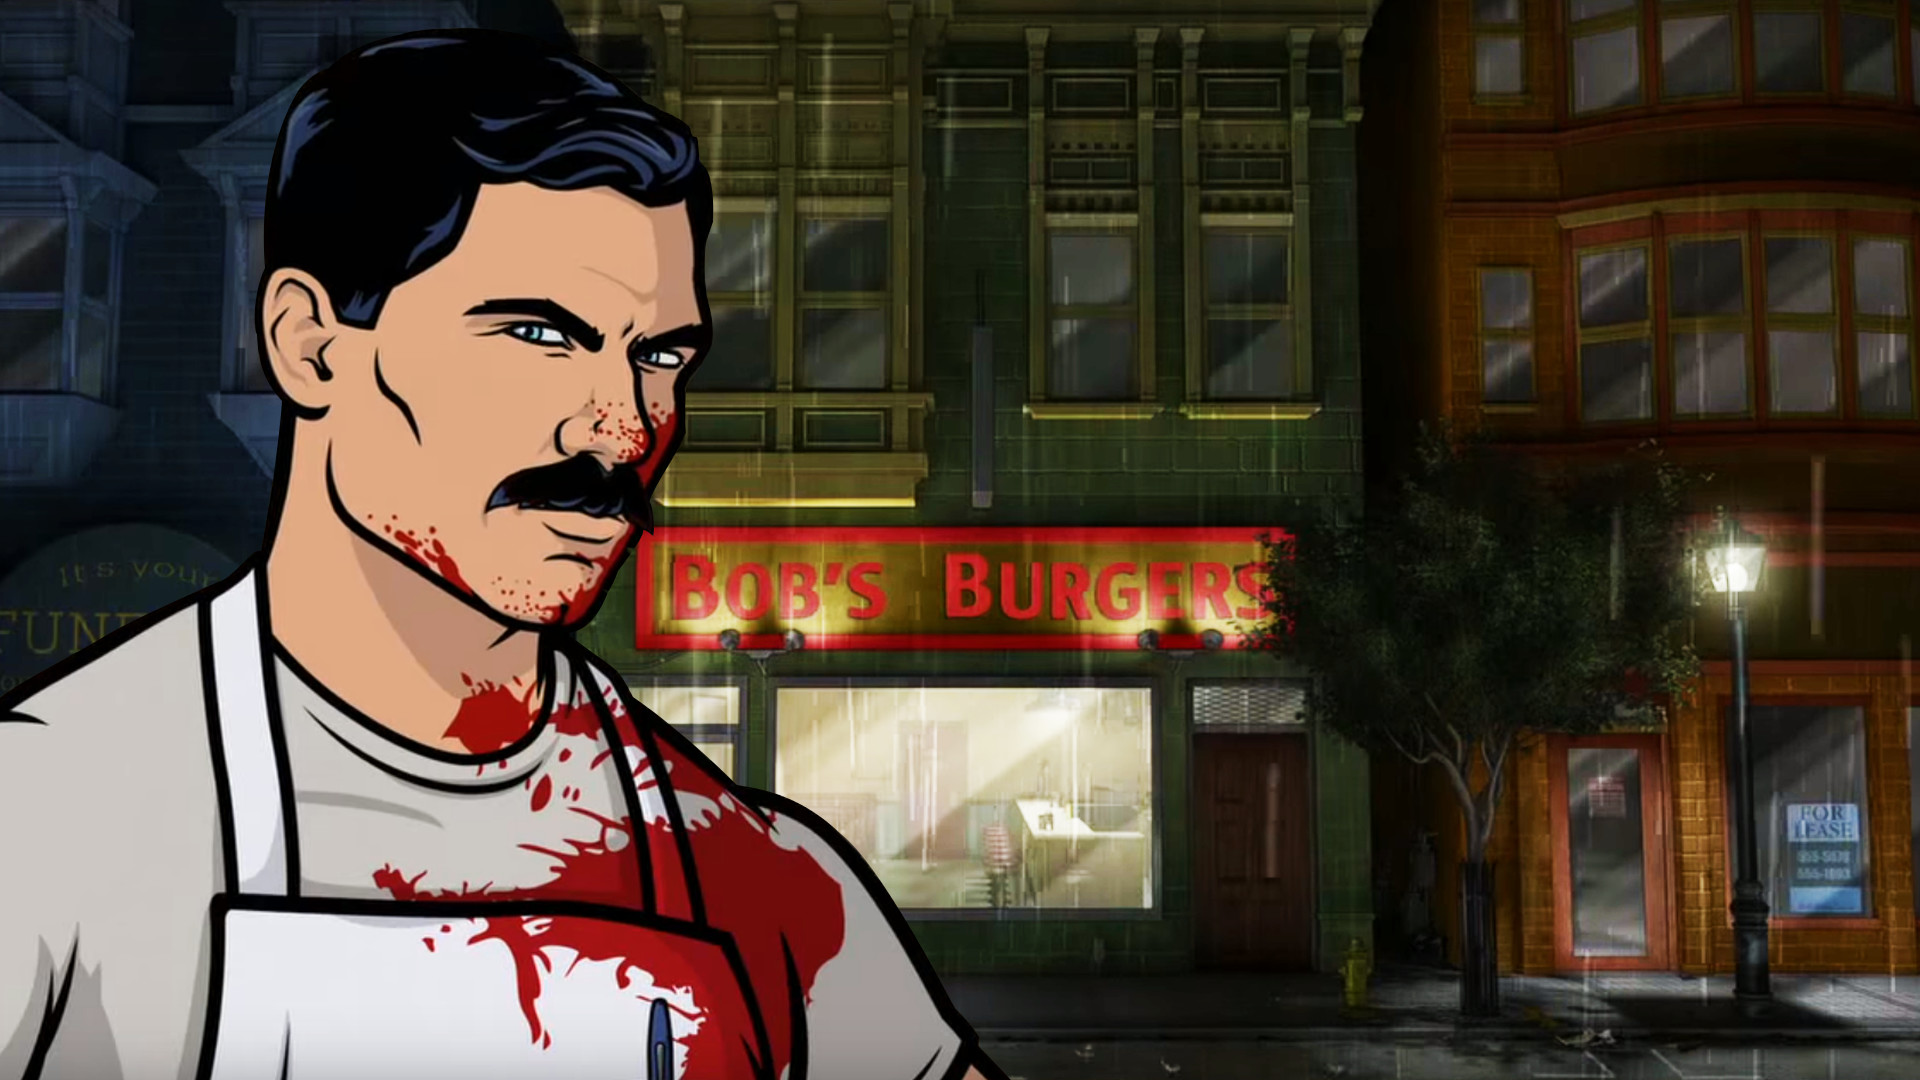 I made a wallpaper using the Archer / Bobs Burgers Episode